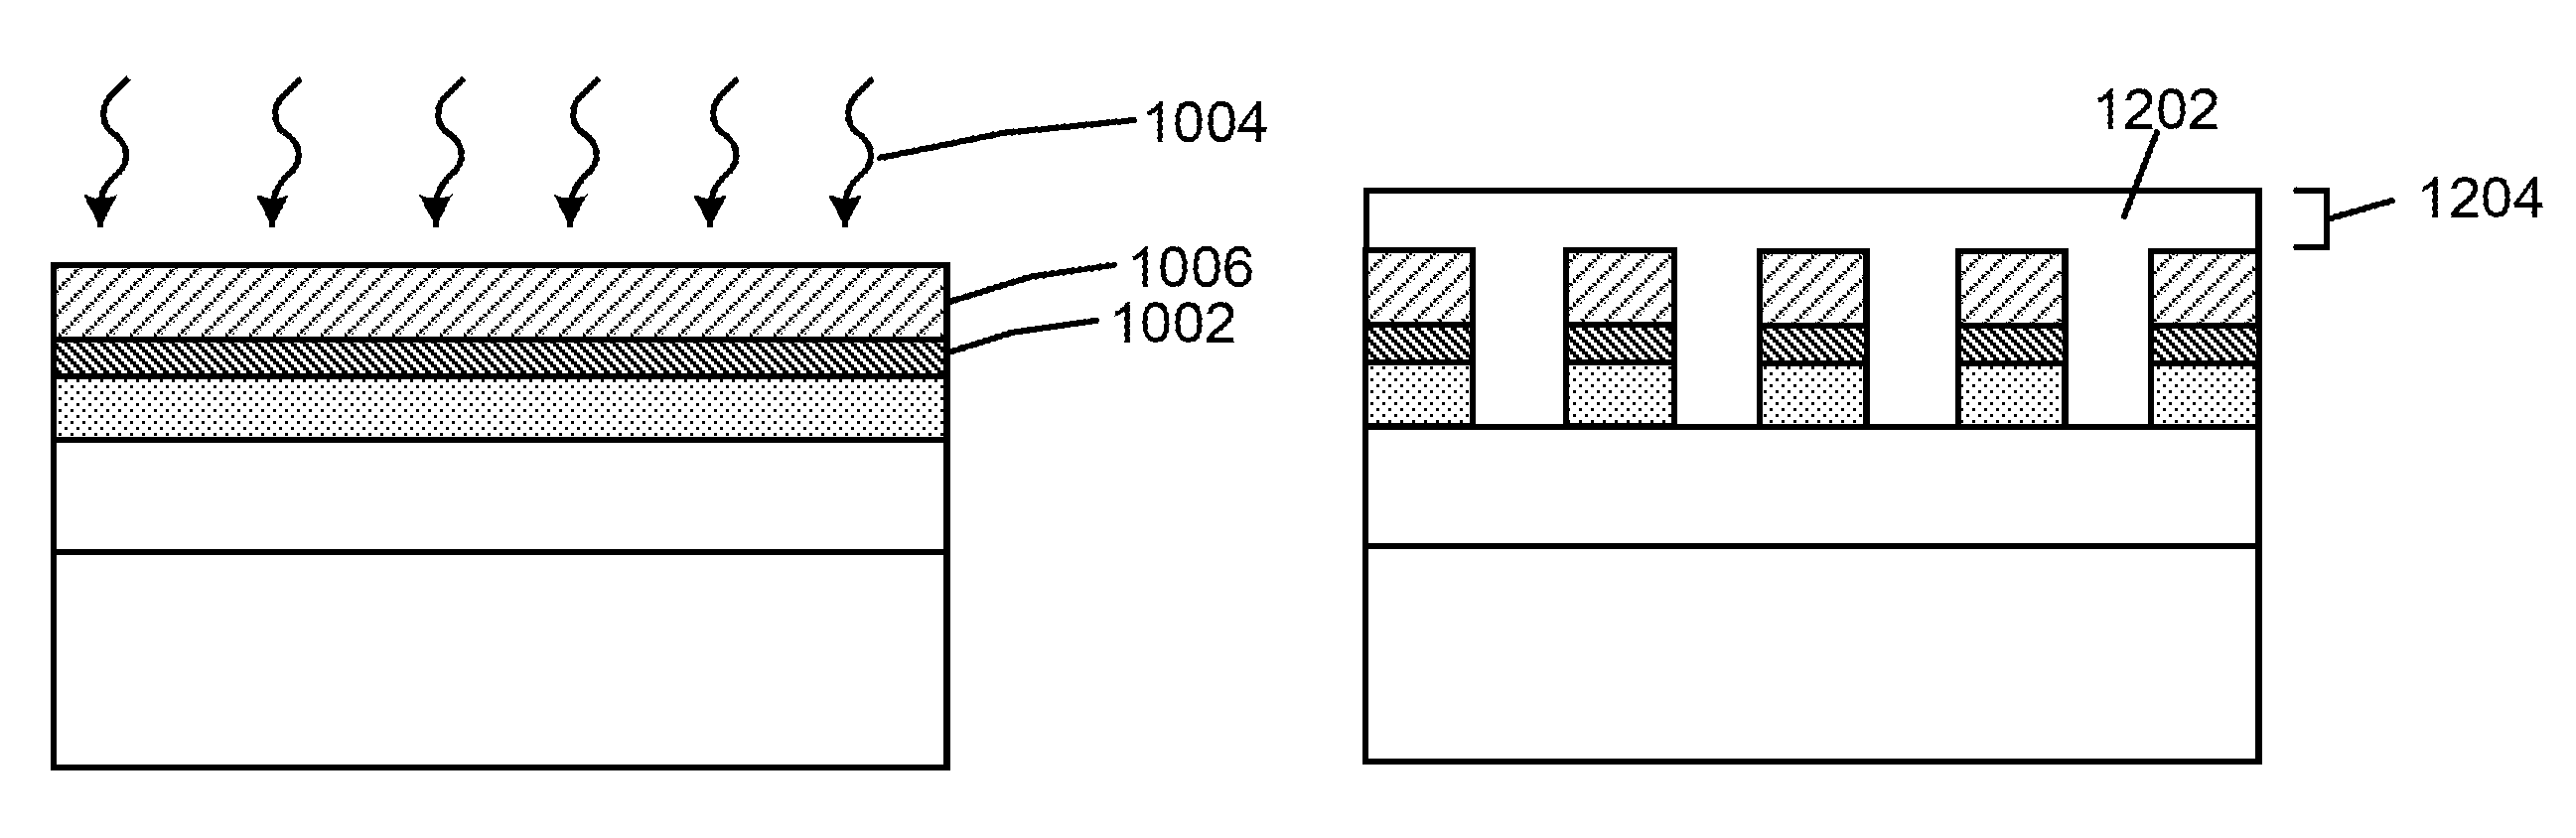 P+ polysilicon material on aluminum for non-volatile memory device and method